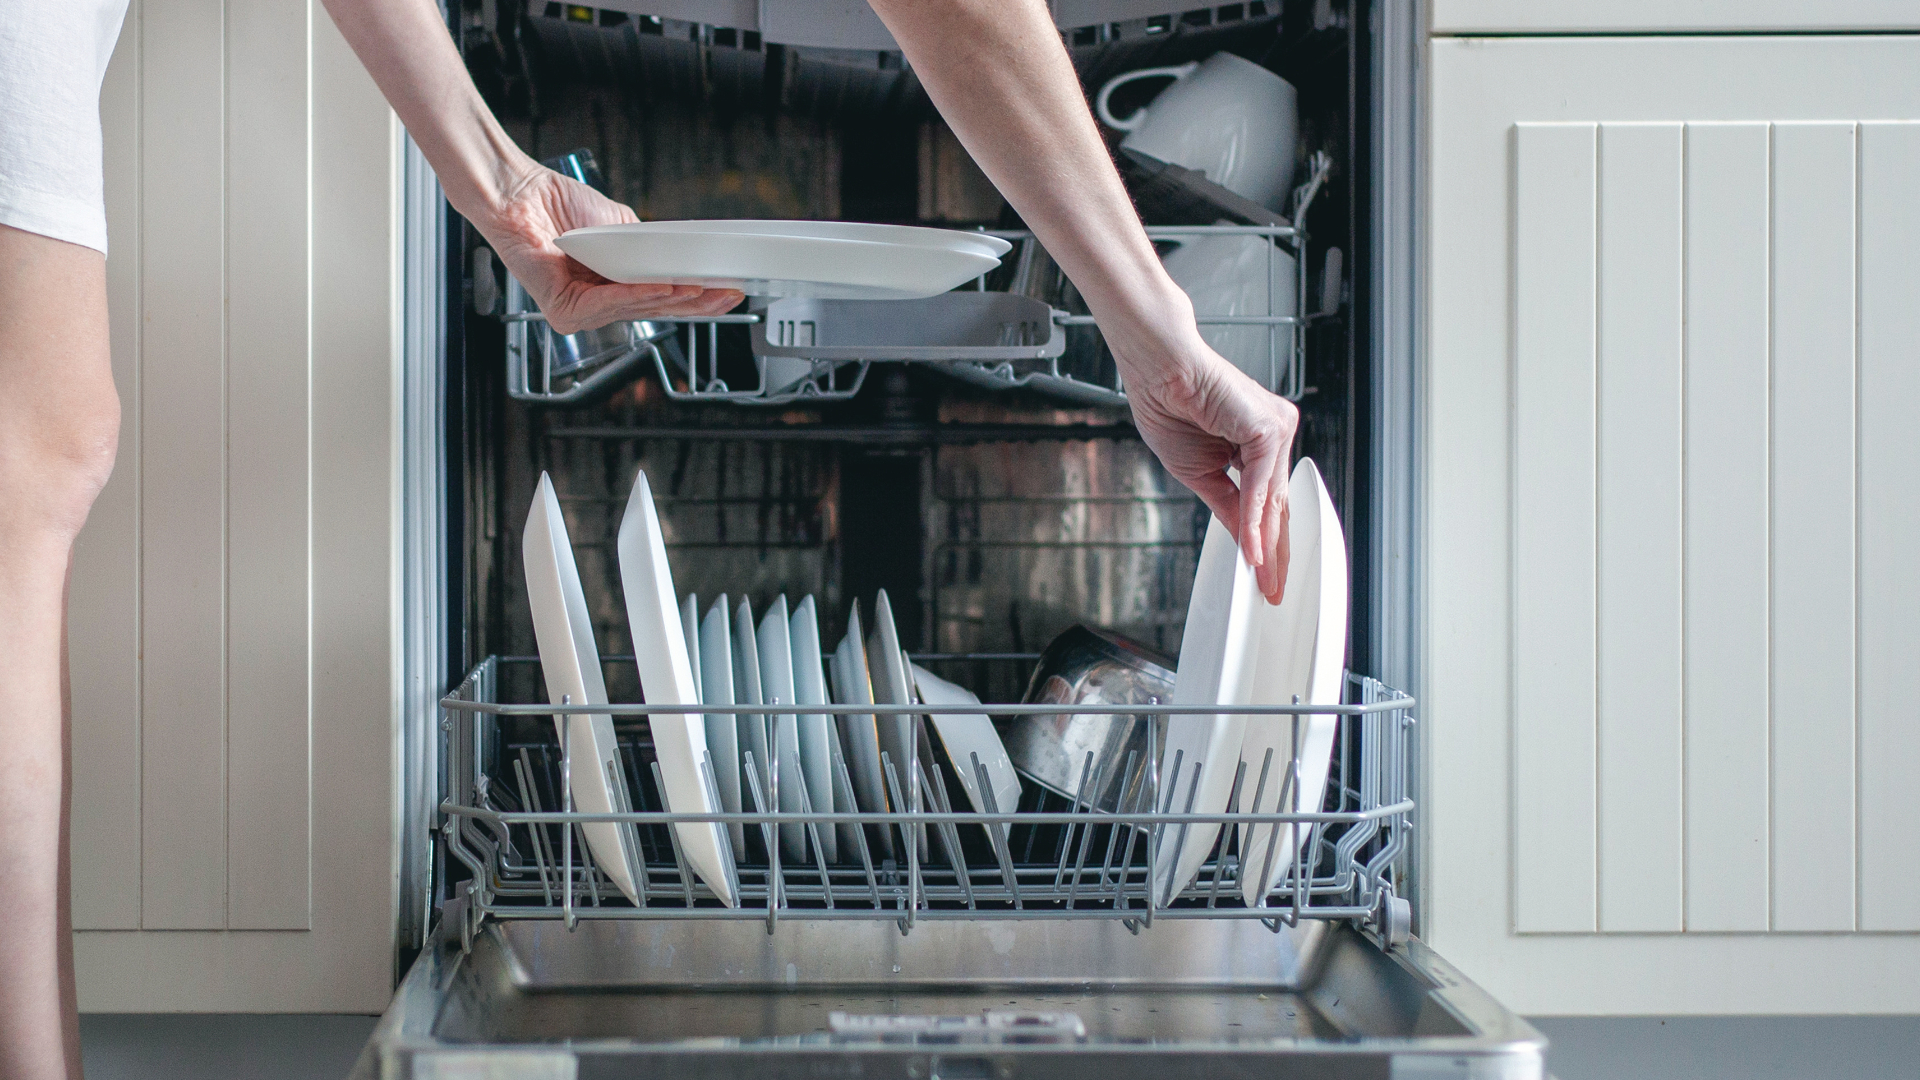 Featured image for “How To Load a Dishwasher Properly”